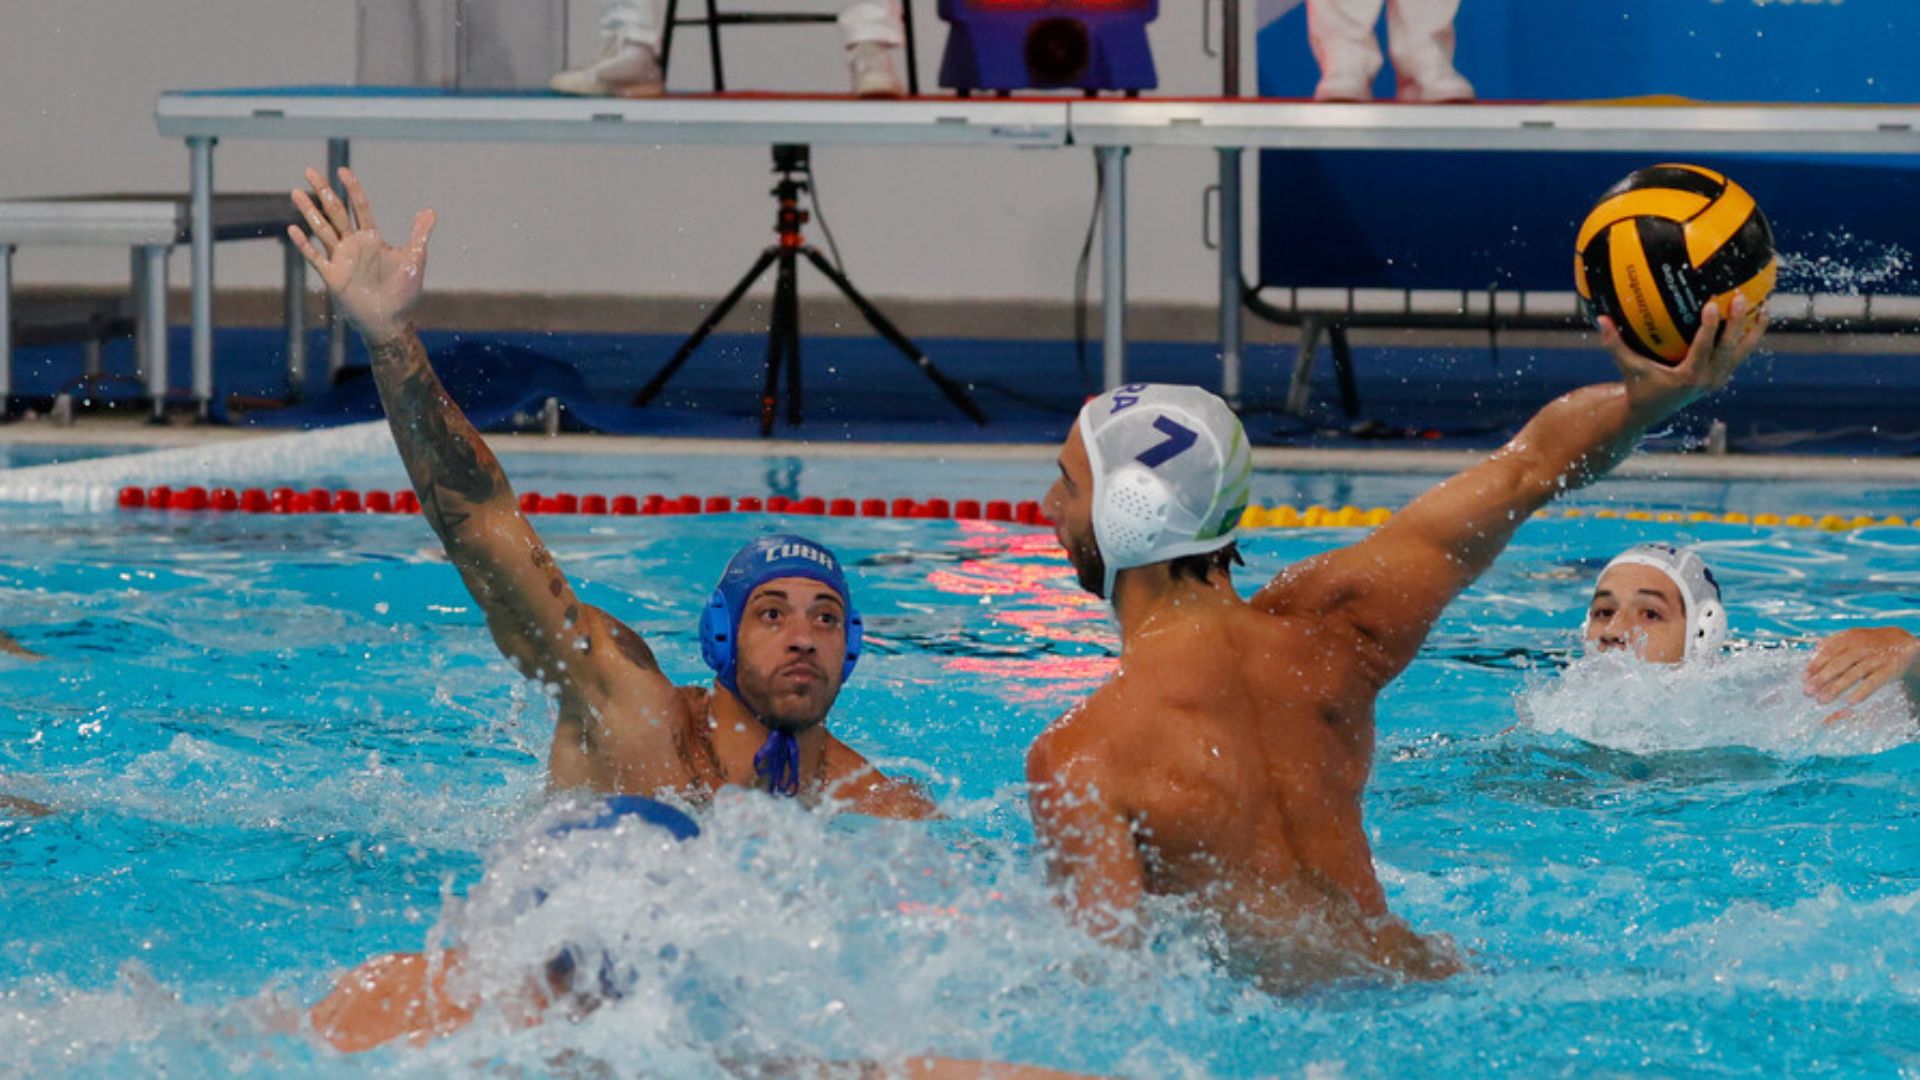 Brasil, Argentina, the USA, and Canada go for gold in water polo